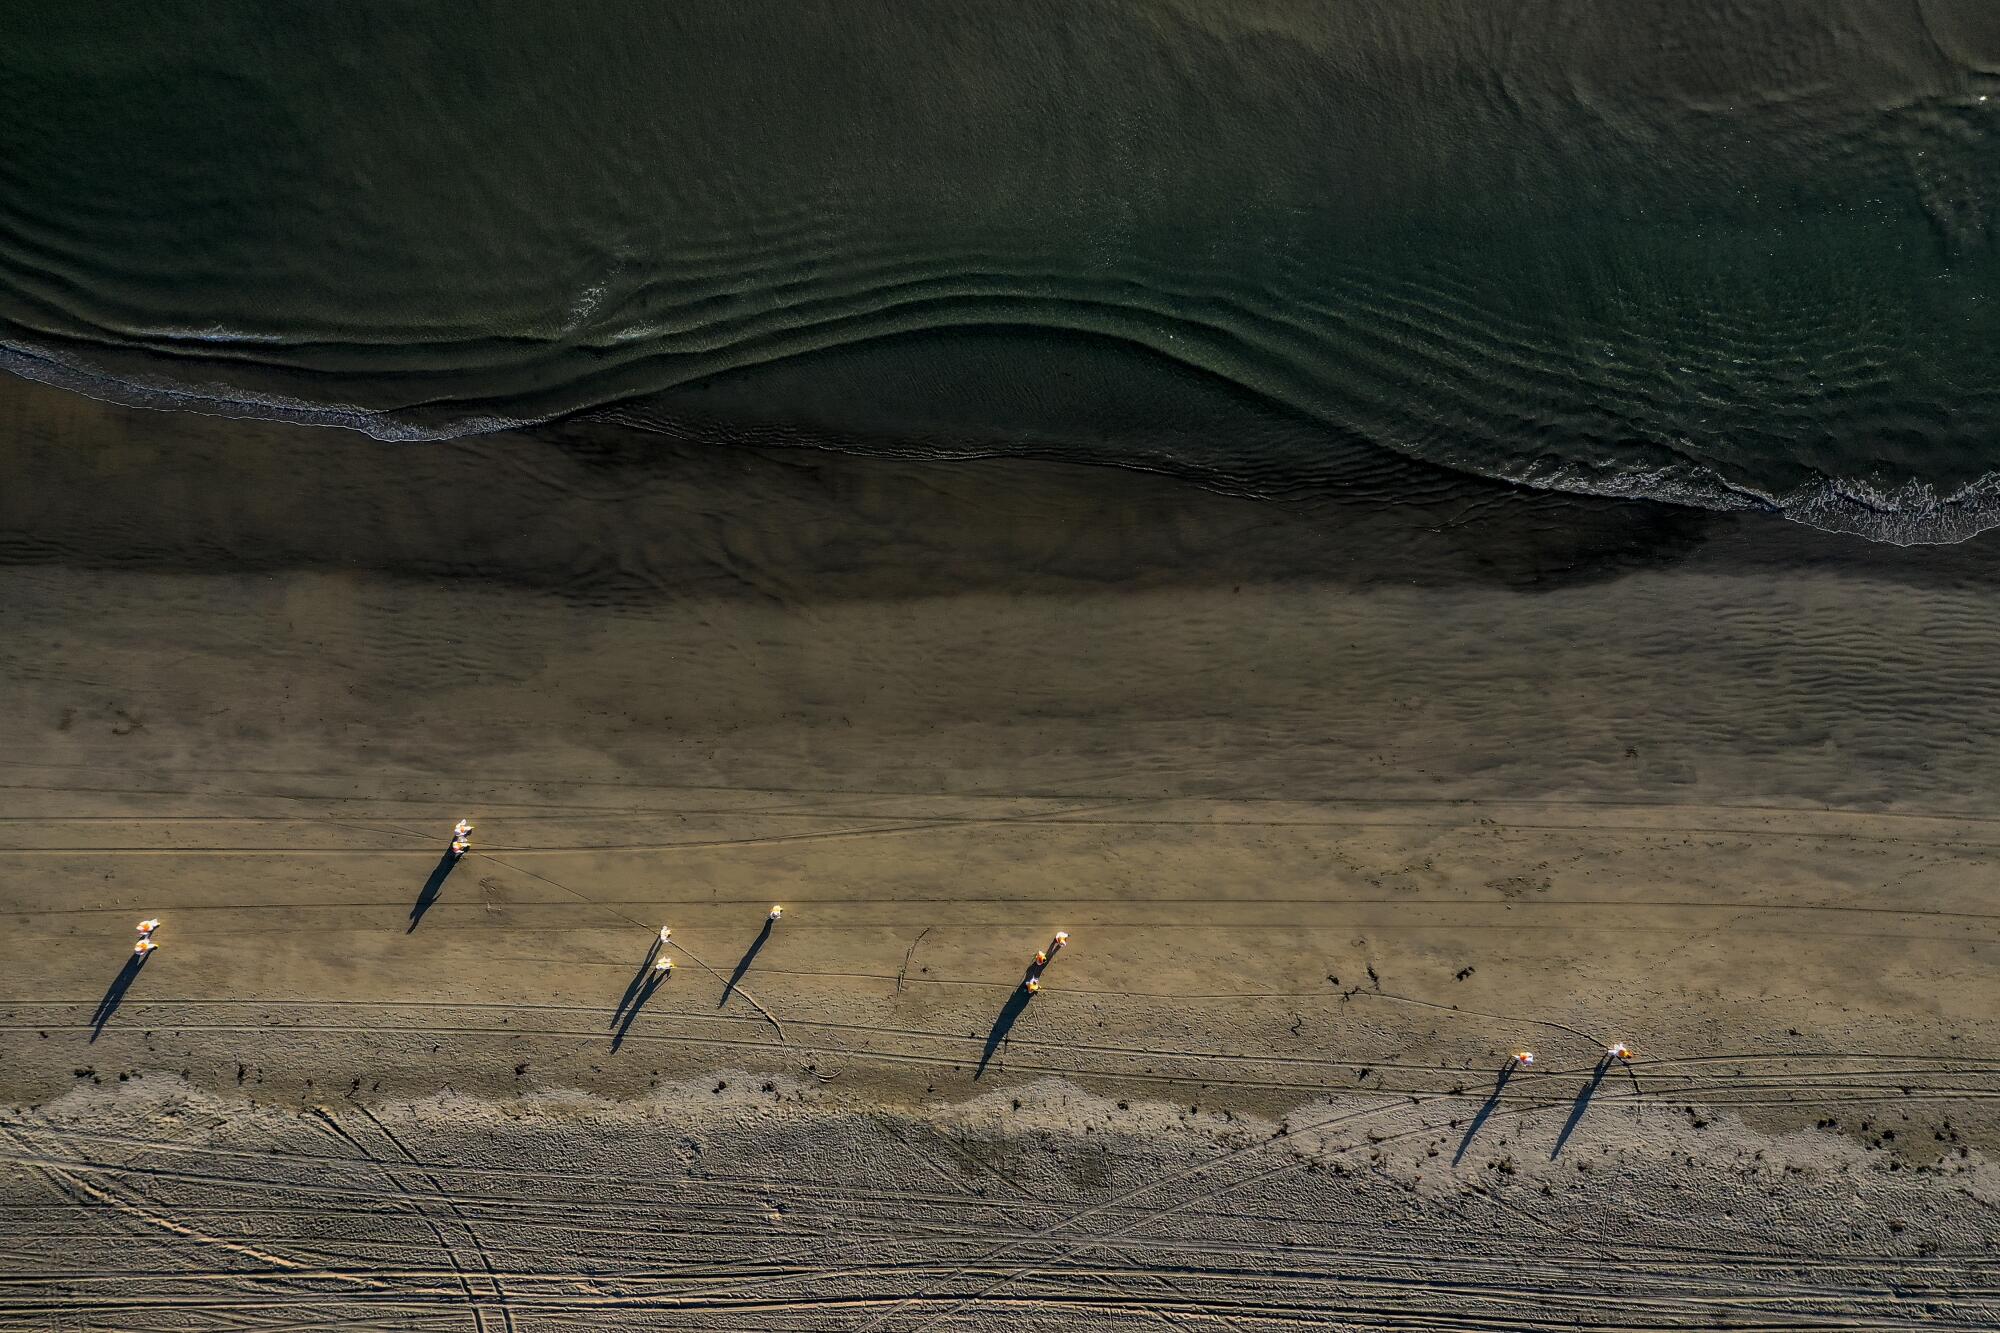 An aerial view of people working on an oiled beach